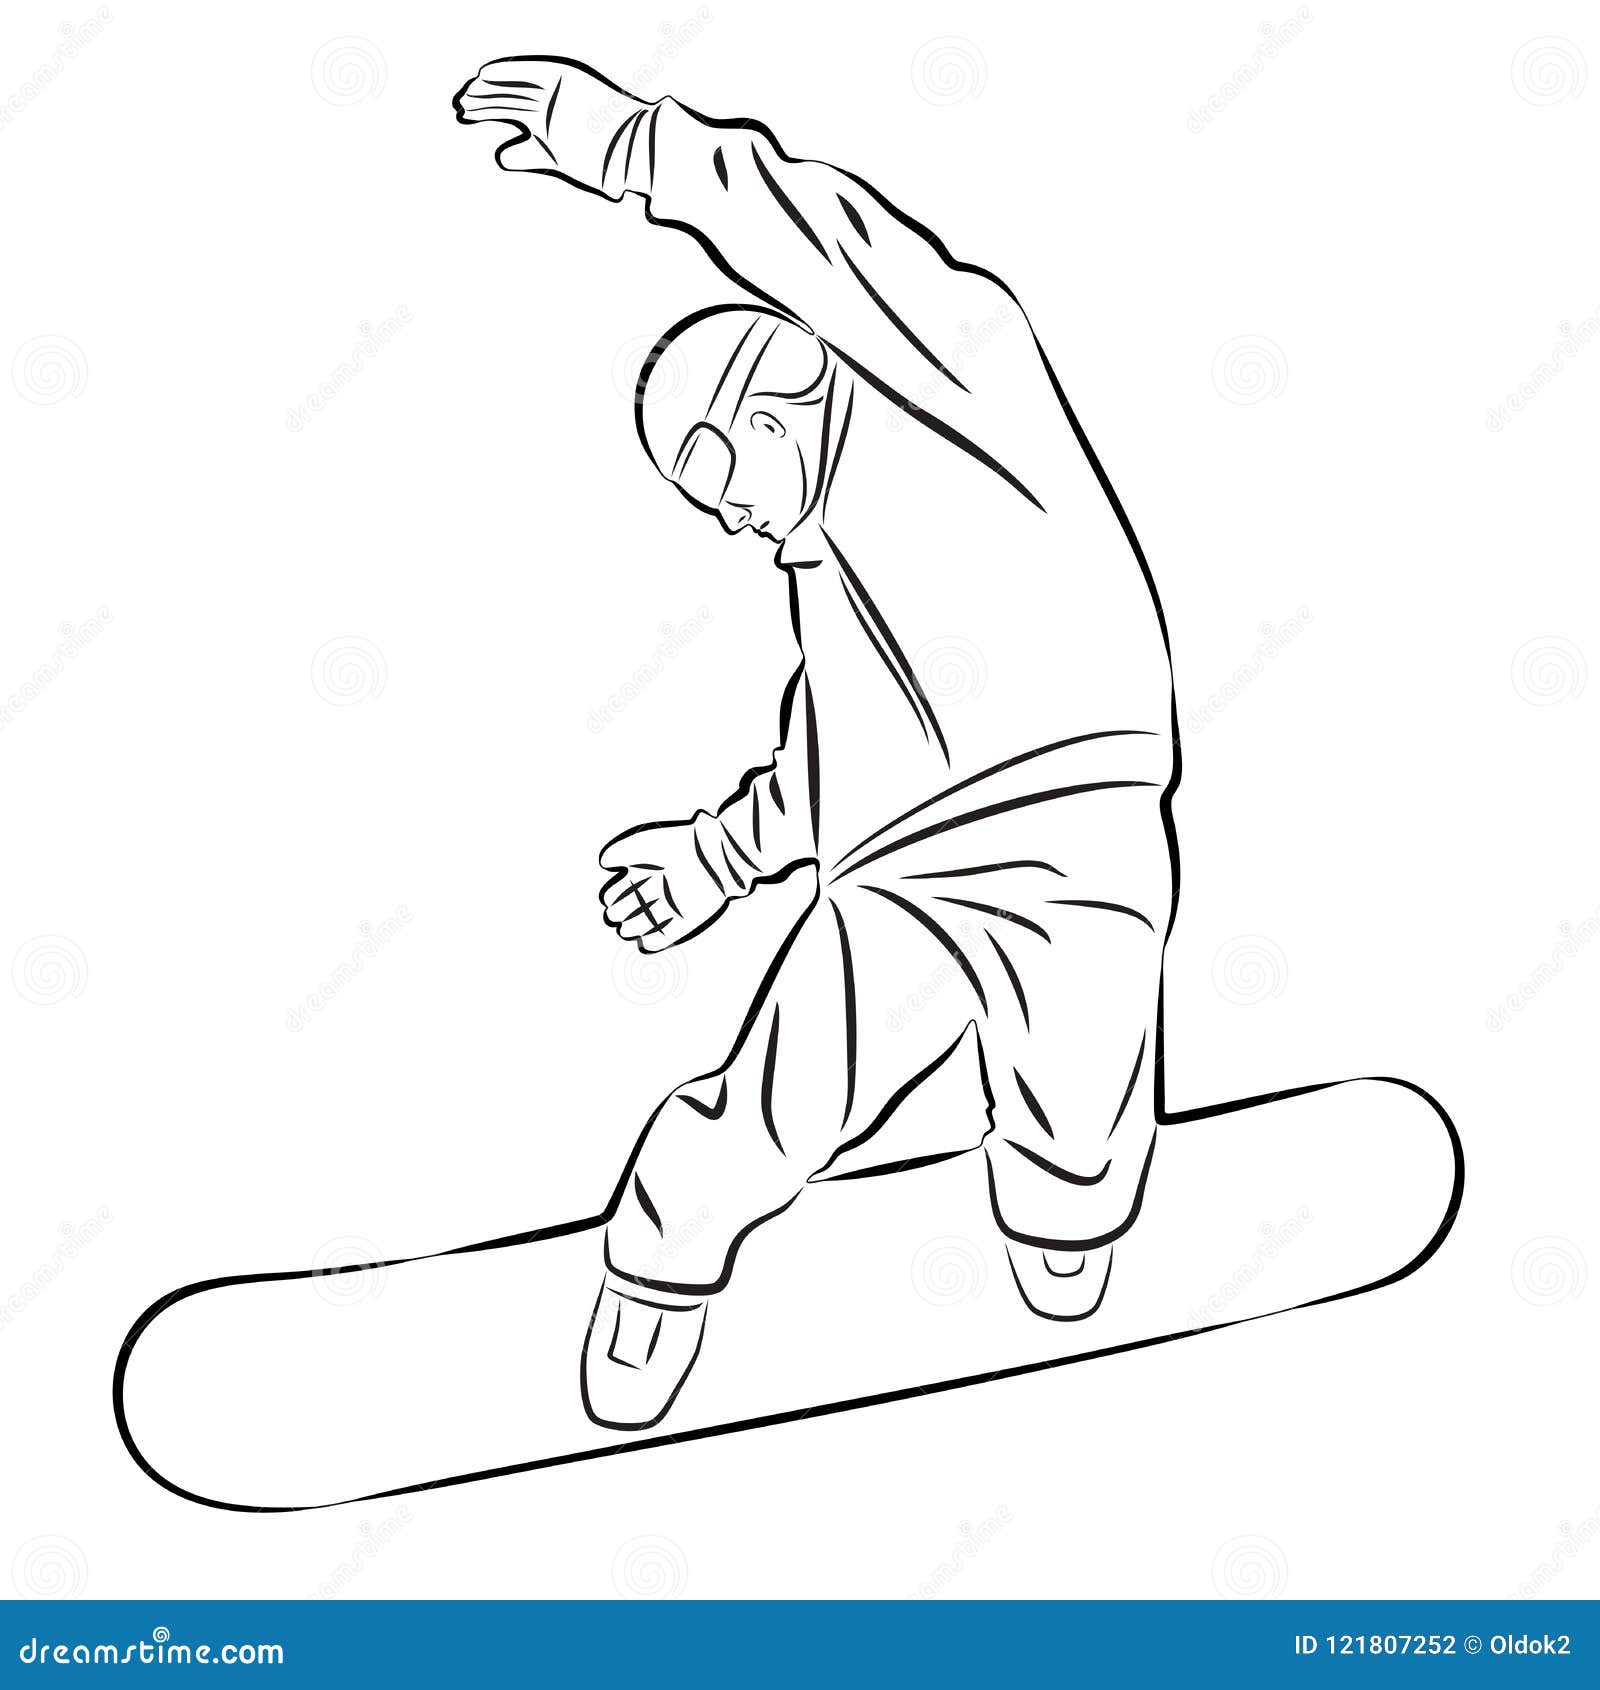 Illustration of a Snowboarder , Vector Draw Stock Vector - Illustration of  sketch, isolated: 121807252